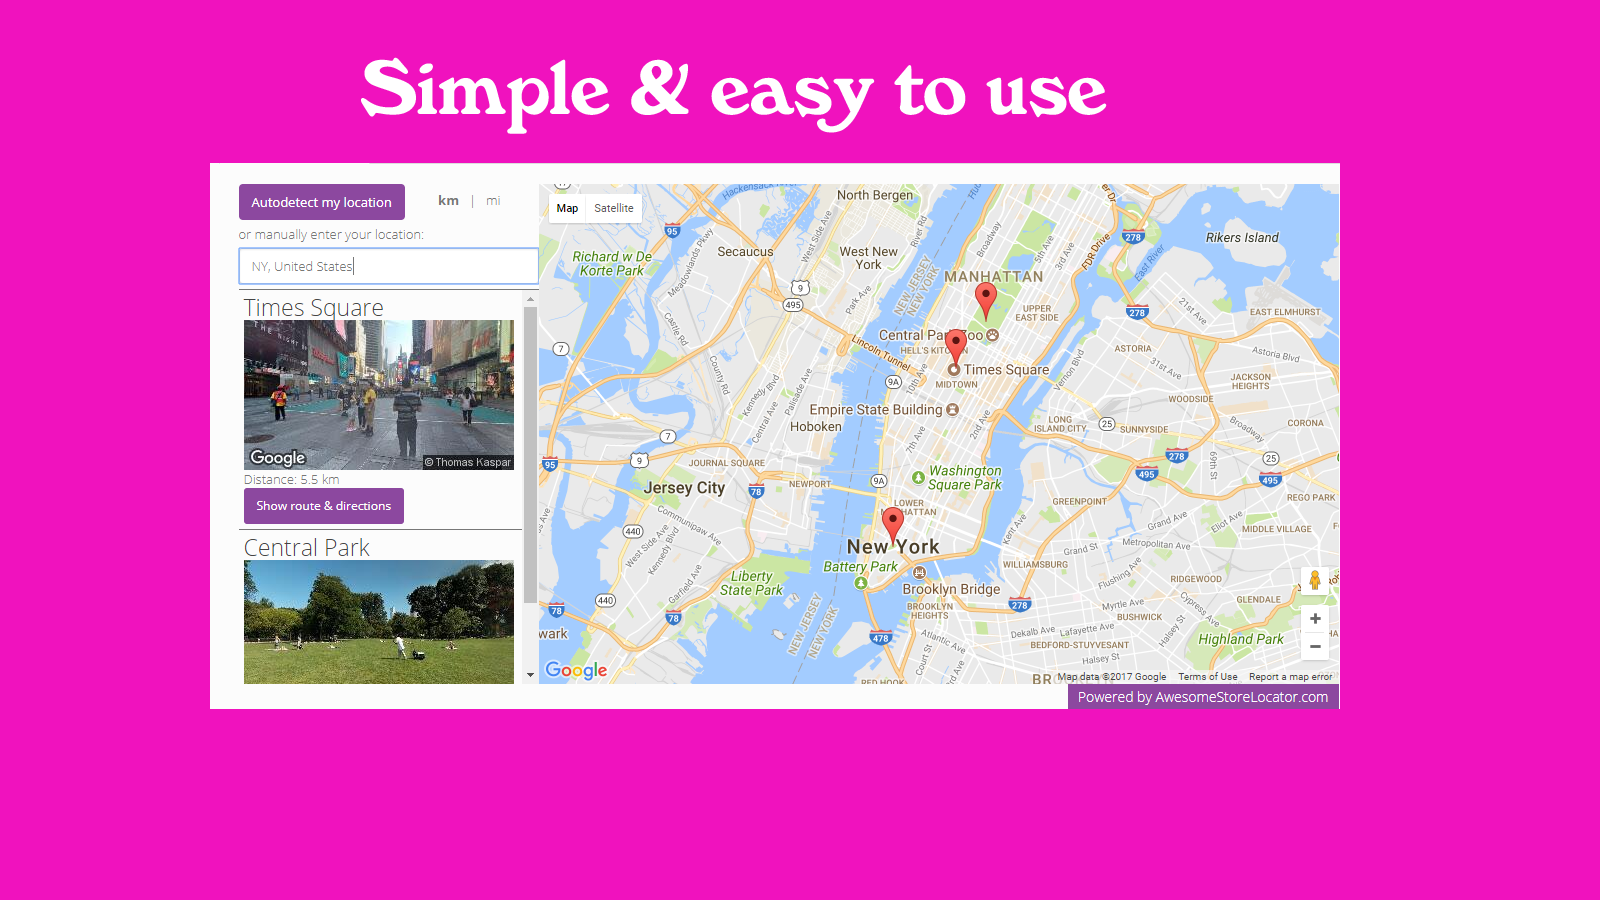 Simple store locator, very easy to use